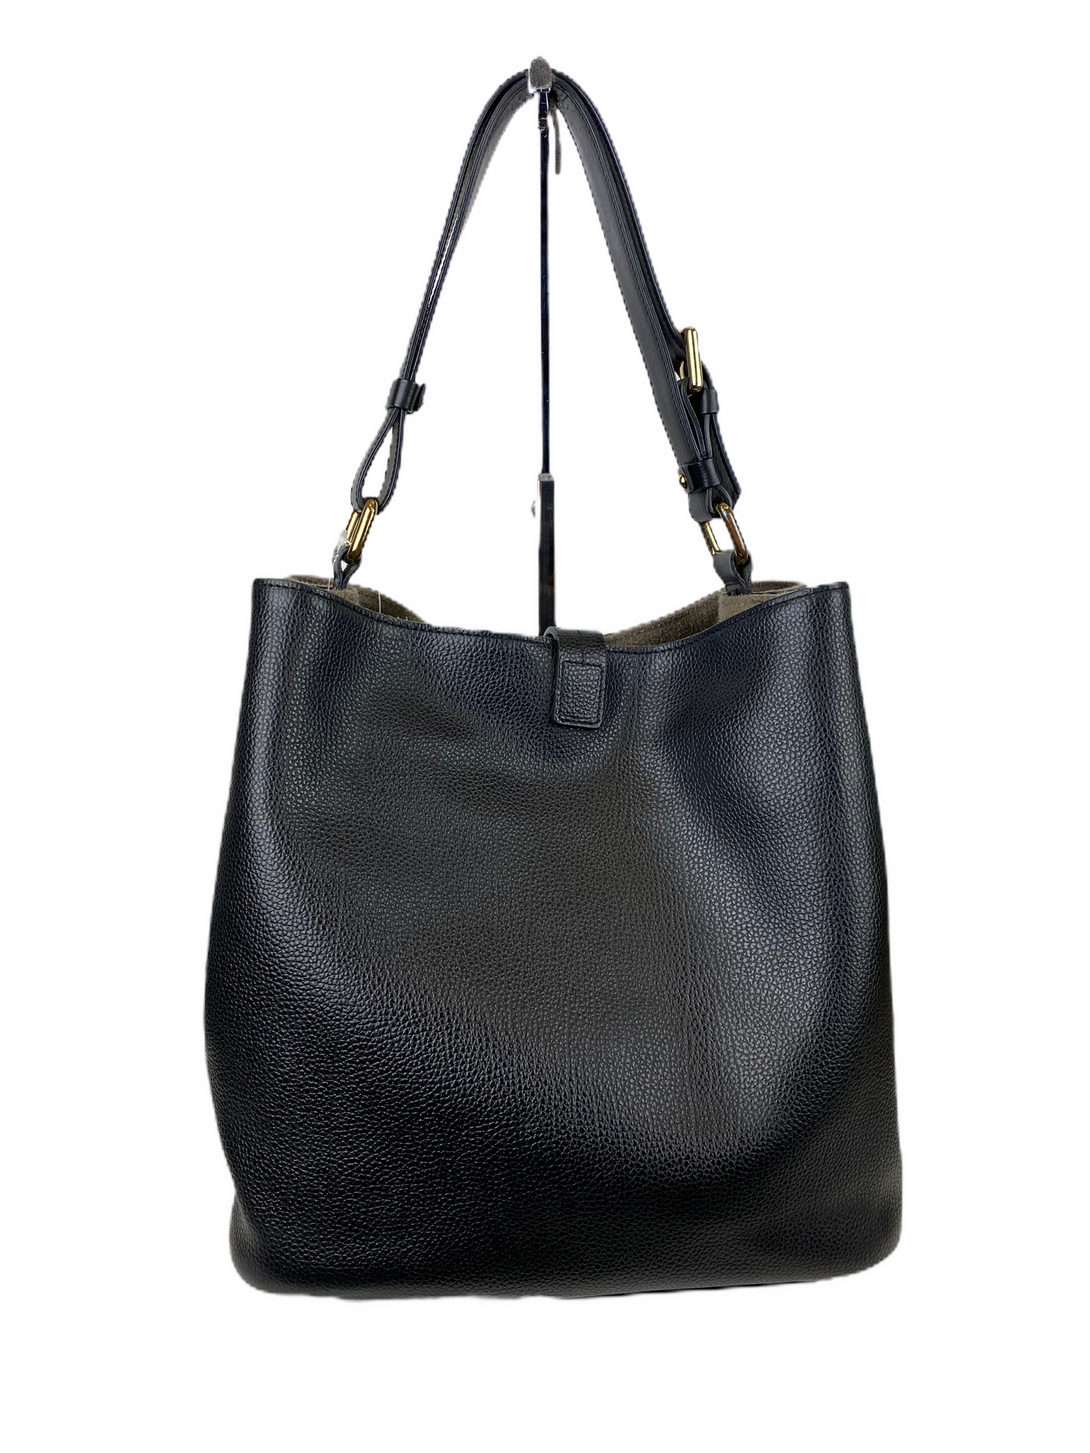 Russell & Bromley Black Leather Hobo - As Seen on Instagram 30/08/2020 - Siopaella Designer Exchange